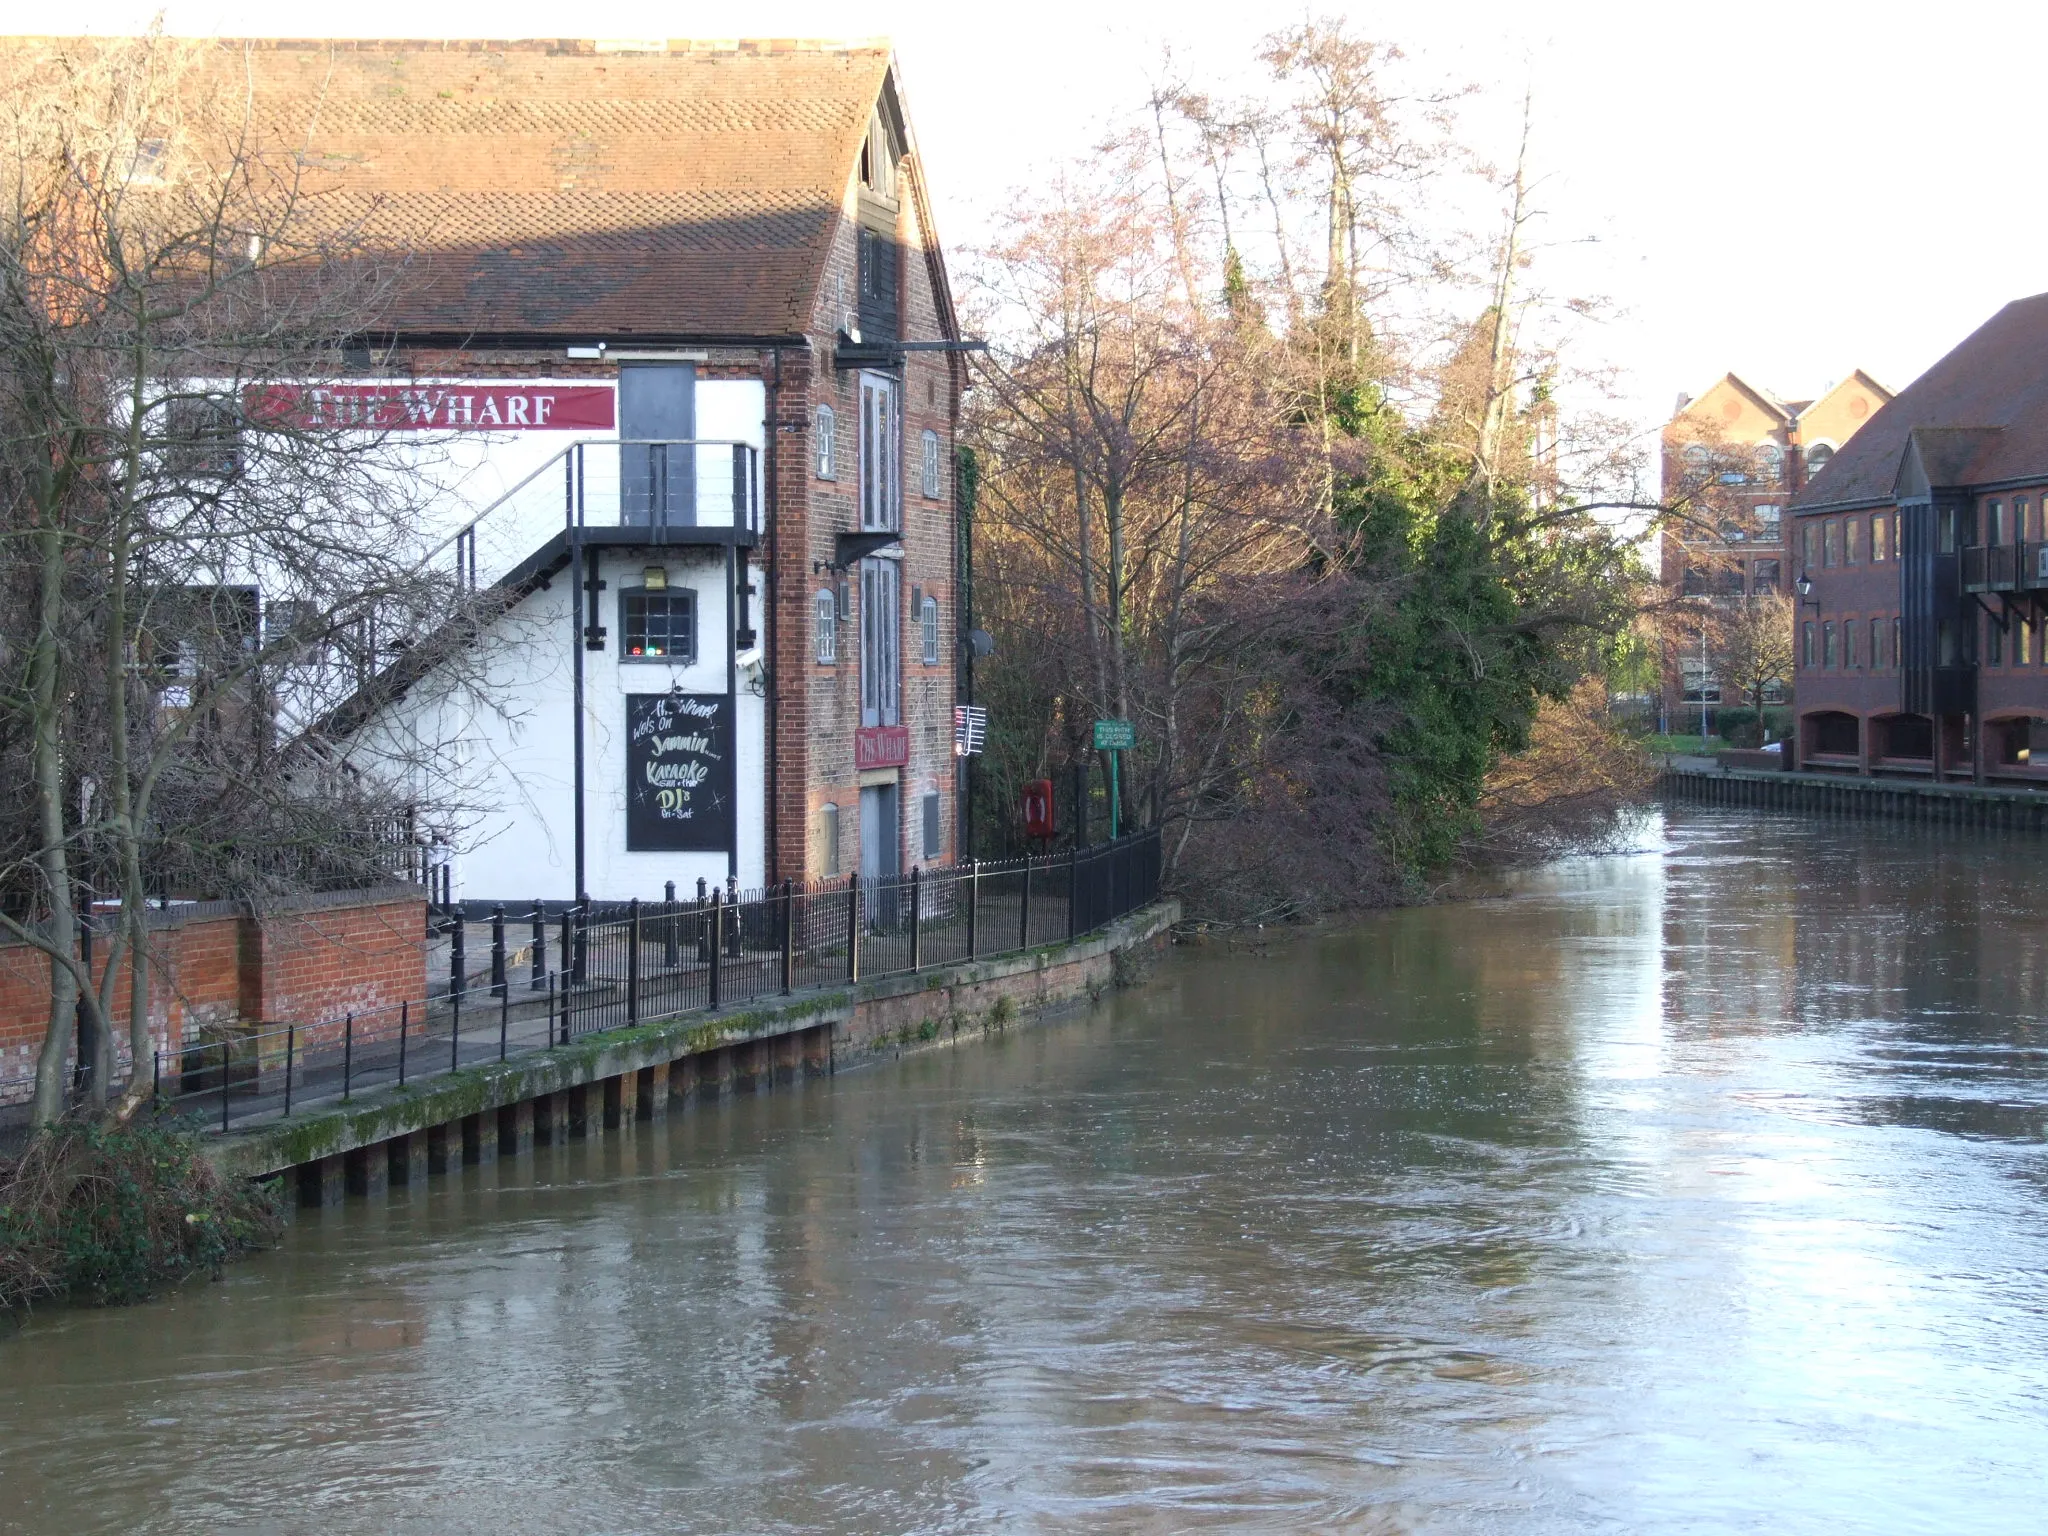 Photo showing: Tonbridge in Kent lies on the River Medway. The main channel passes under Big Bridge.Three channels have been culverted, the Botany Stream remains. Tonbridge is protected by Tonbridge Castle
River Medway downstream from Big Bridge showing the wharves

Camera location 51° 11′ 43.44″ N, 0° 16′ 30″ E View this and other nearby images on: OpenStreetMap 51.195400;    0.275000